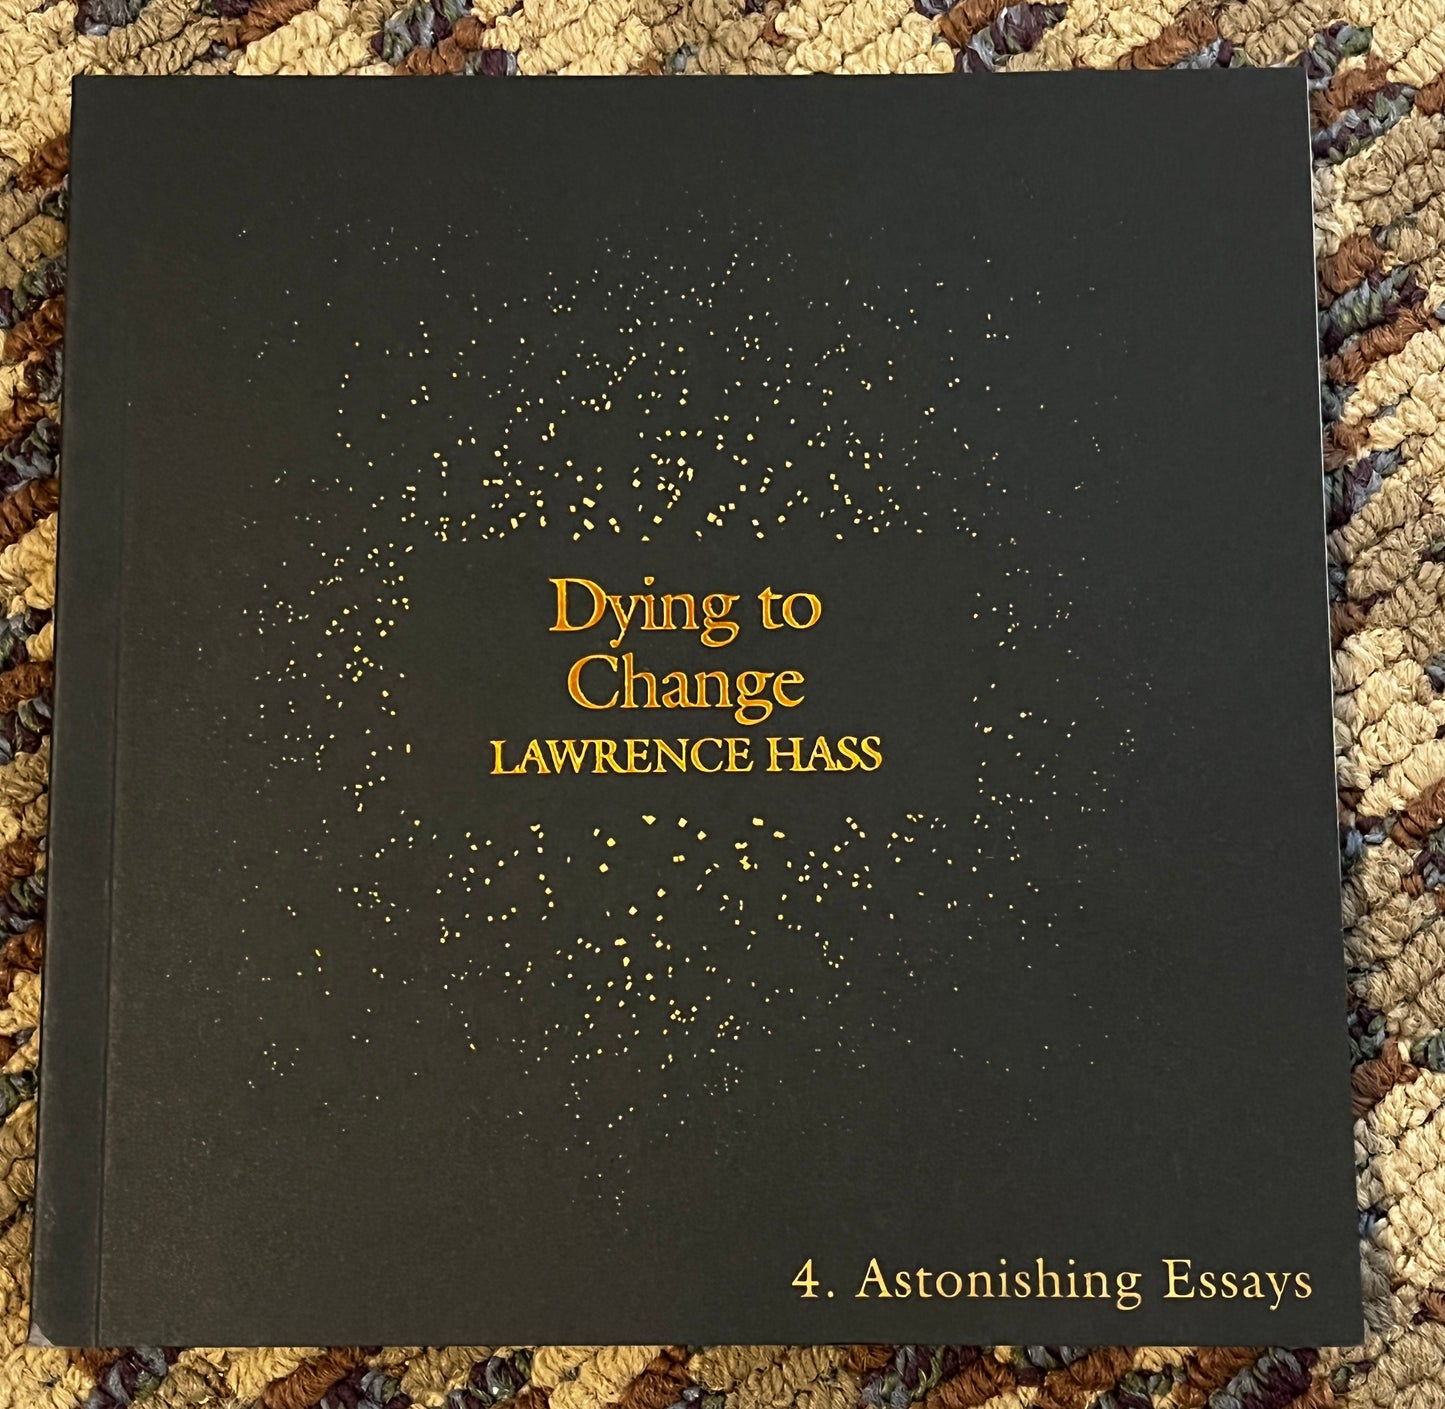 Astonishing Essays #4 - Dying to Change - Lawrence Hass